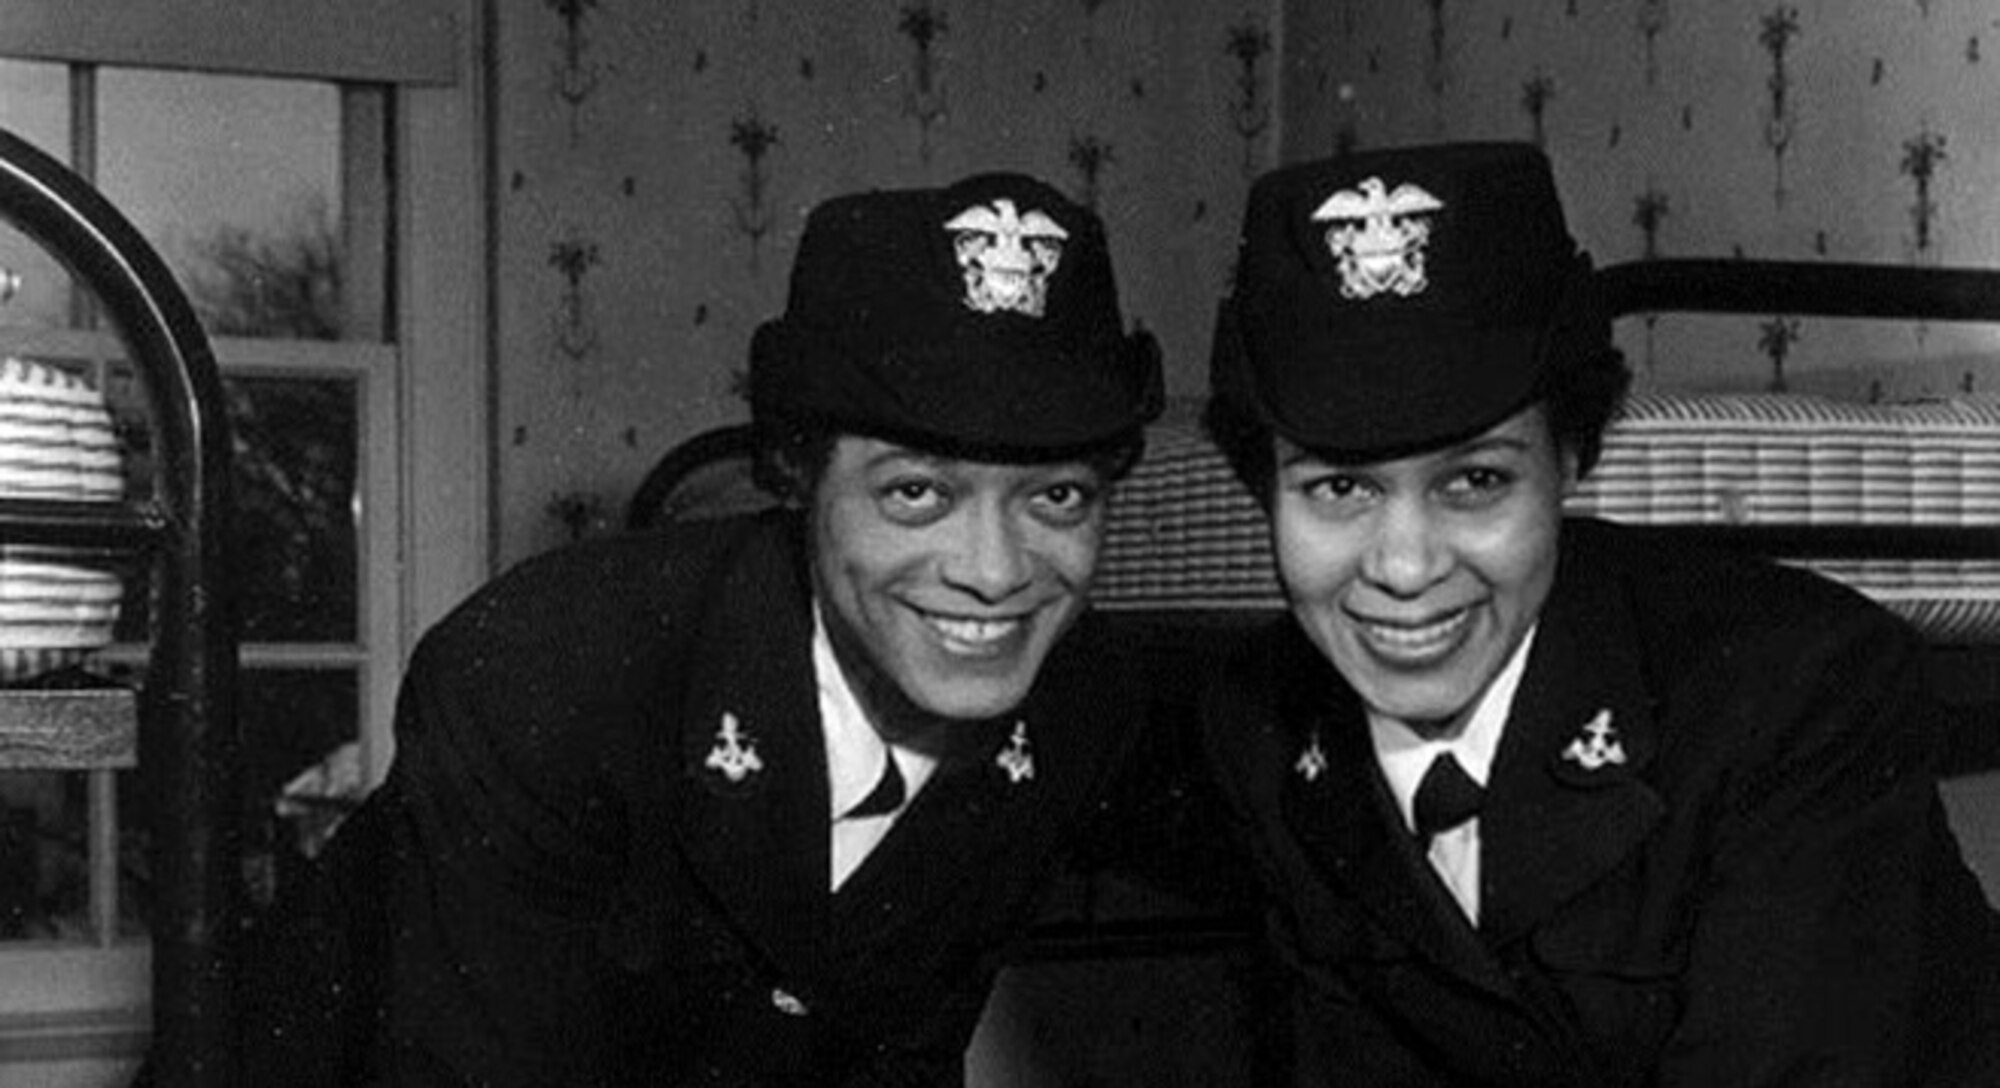 In 1944, Harriet Pickens and Frances Wills received commissions as the first African-American ‘Women Accepted for Volunteer Emergency Services’ officers in the U.S. Navy. (Courtesy photo)